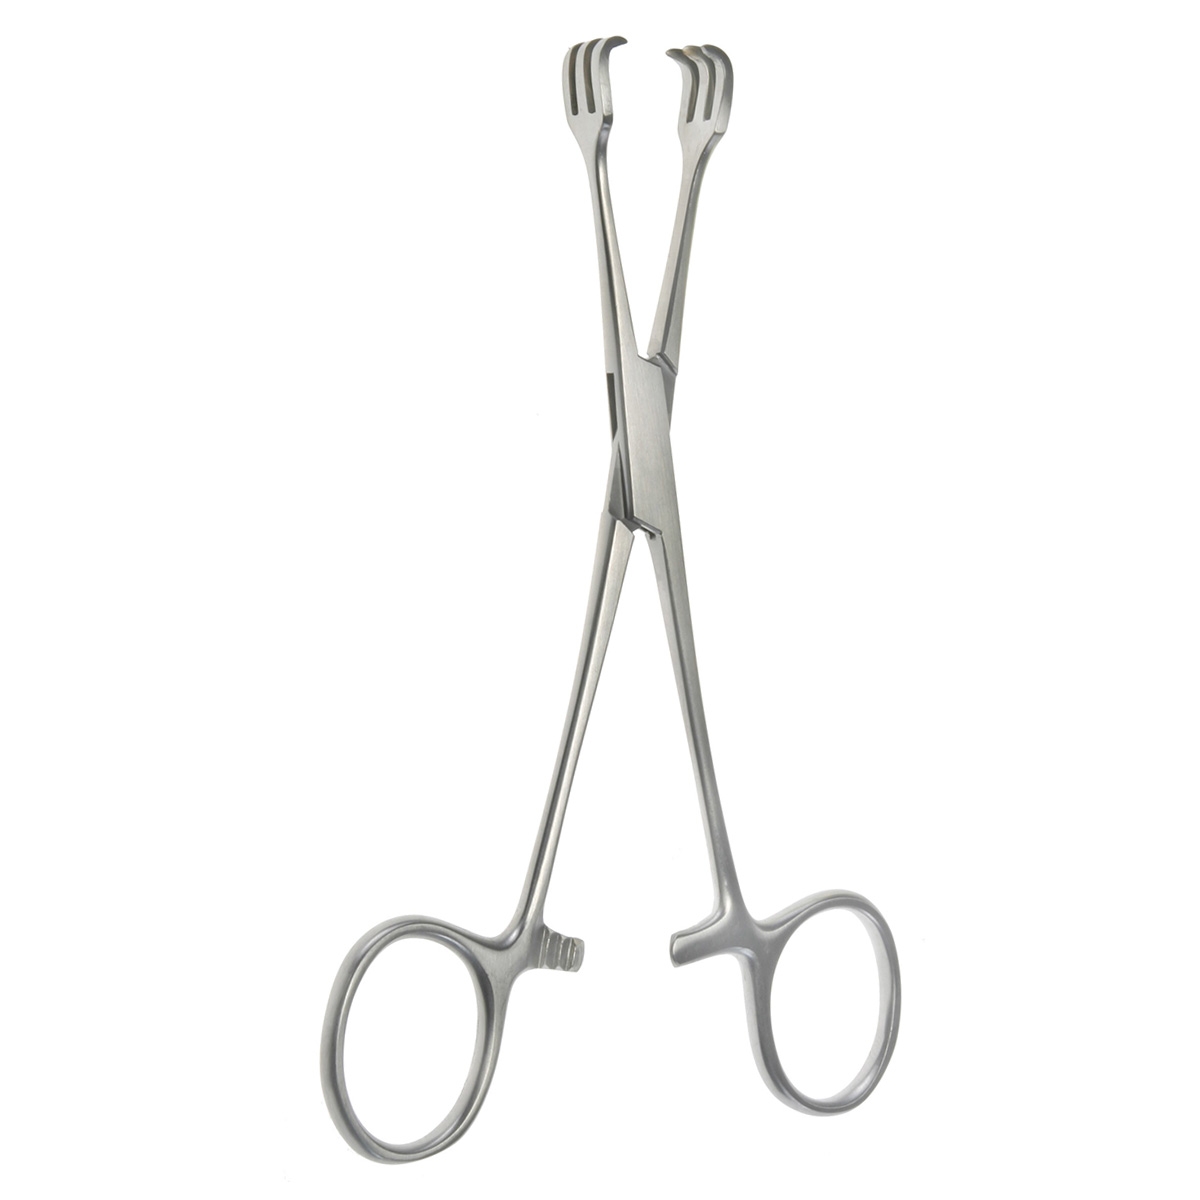 6 ( Triple Hook ) Lahey Traction Forceps 3x3 prong - BOSS Surgical  Instruments